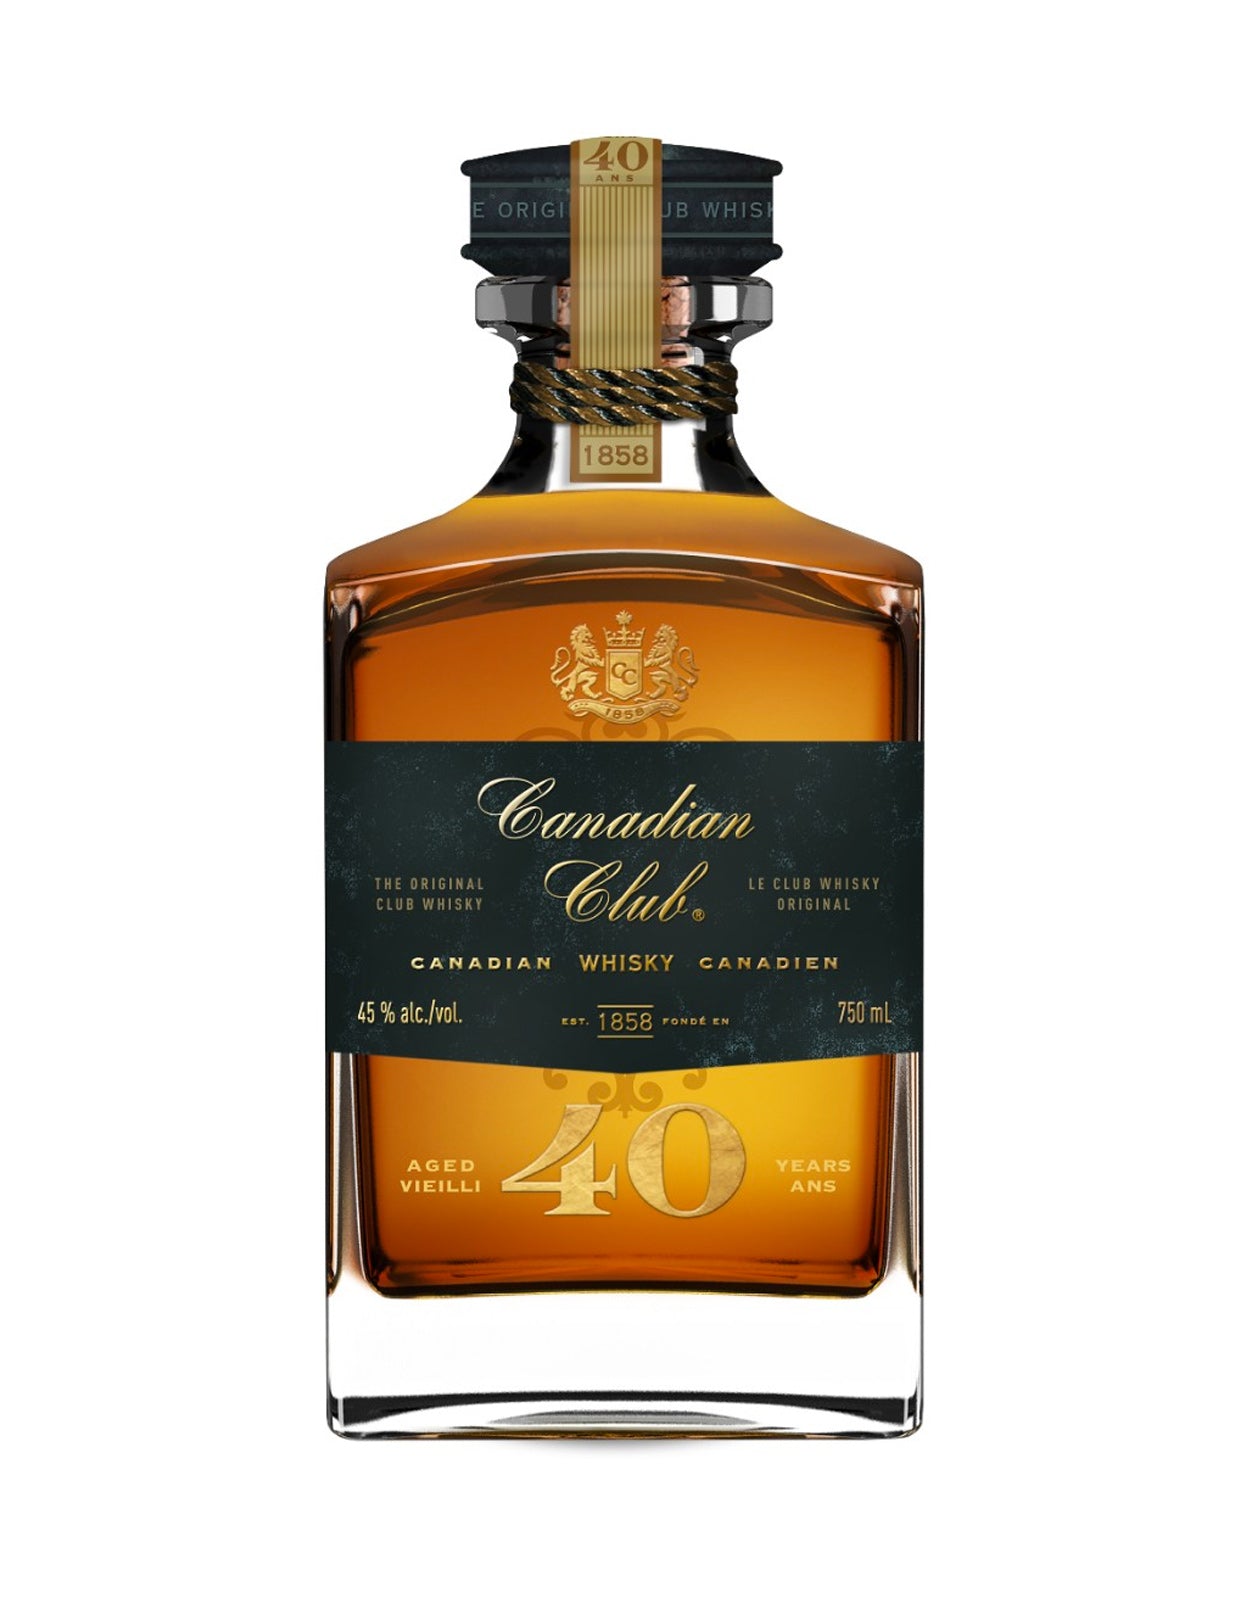 Canadian Club Chronicles 40 Year Old